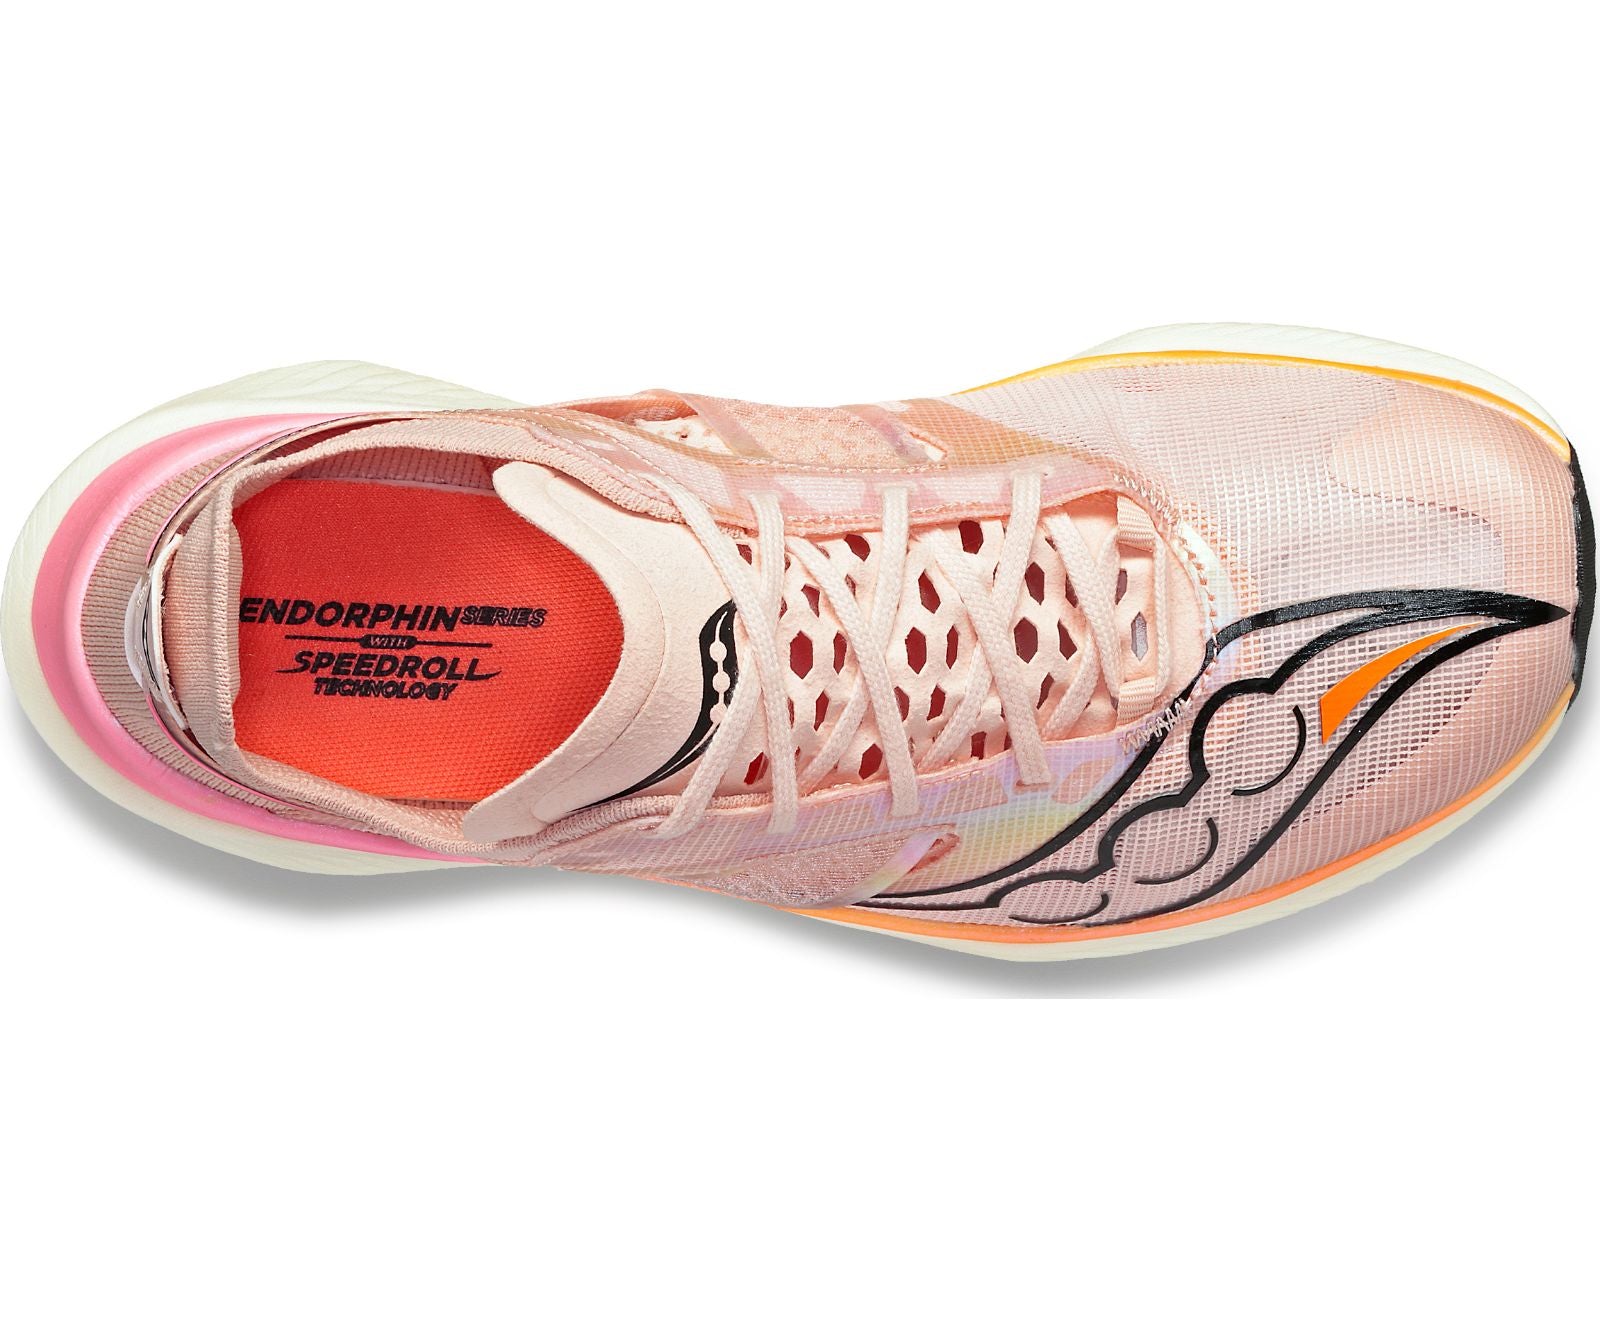 Top view of the Men's Endorphin Elite by Saucony in the color Mars